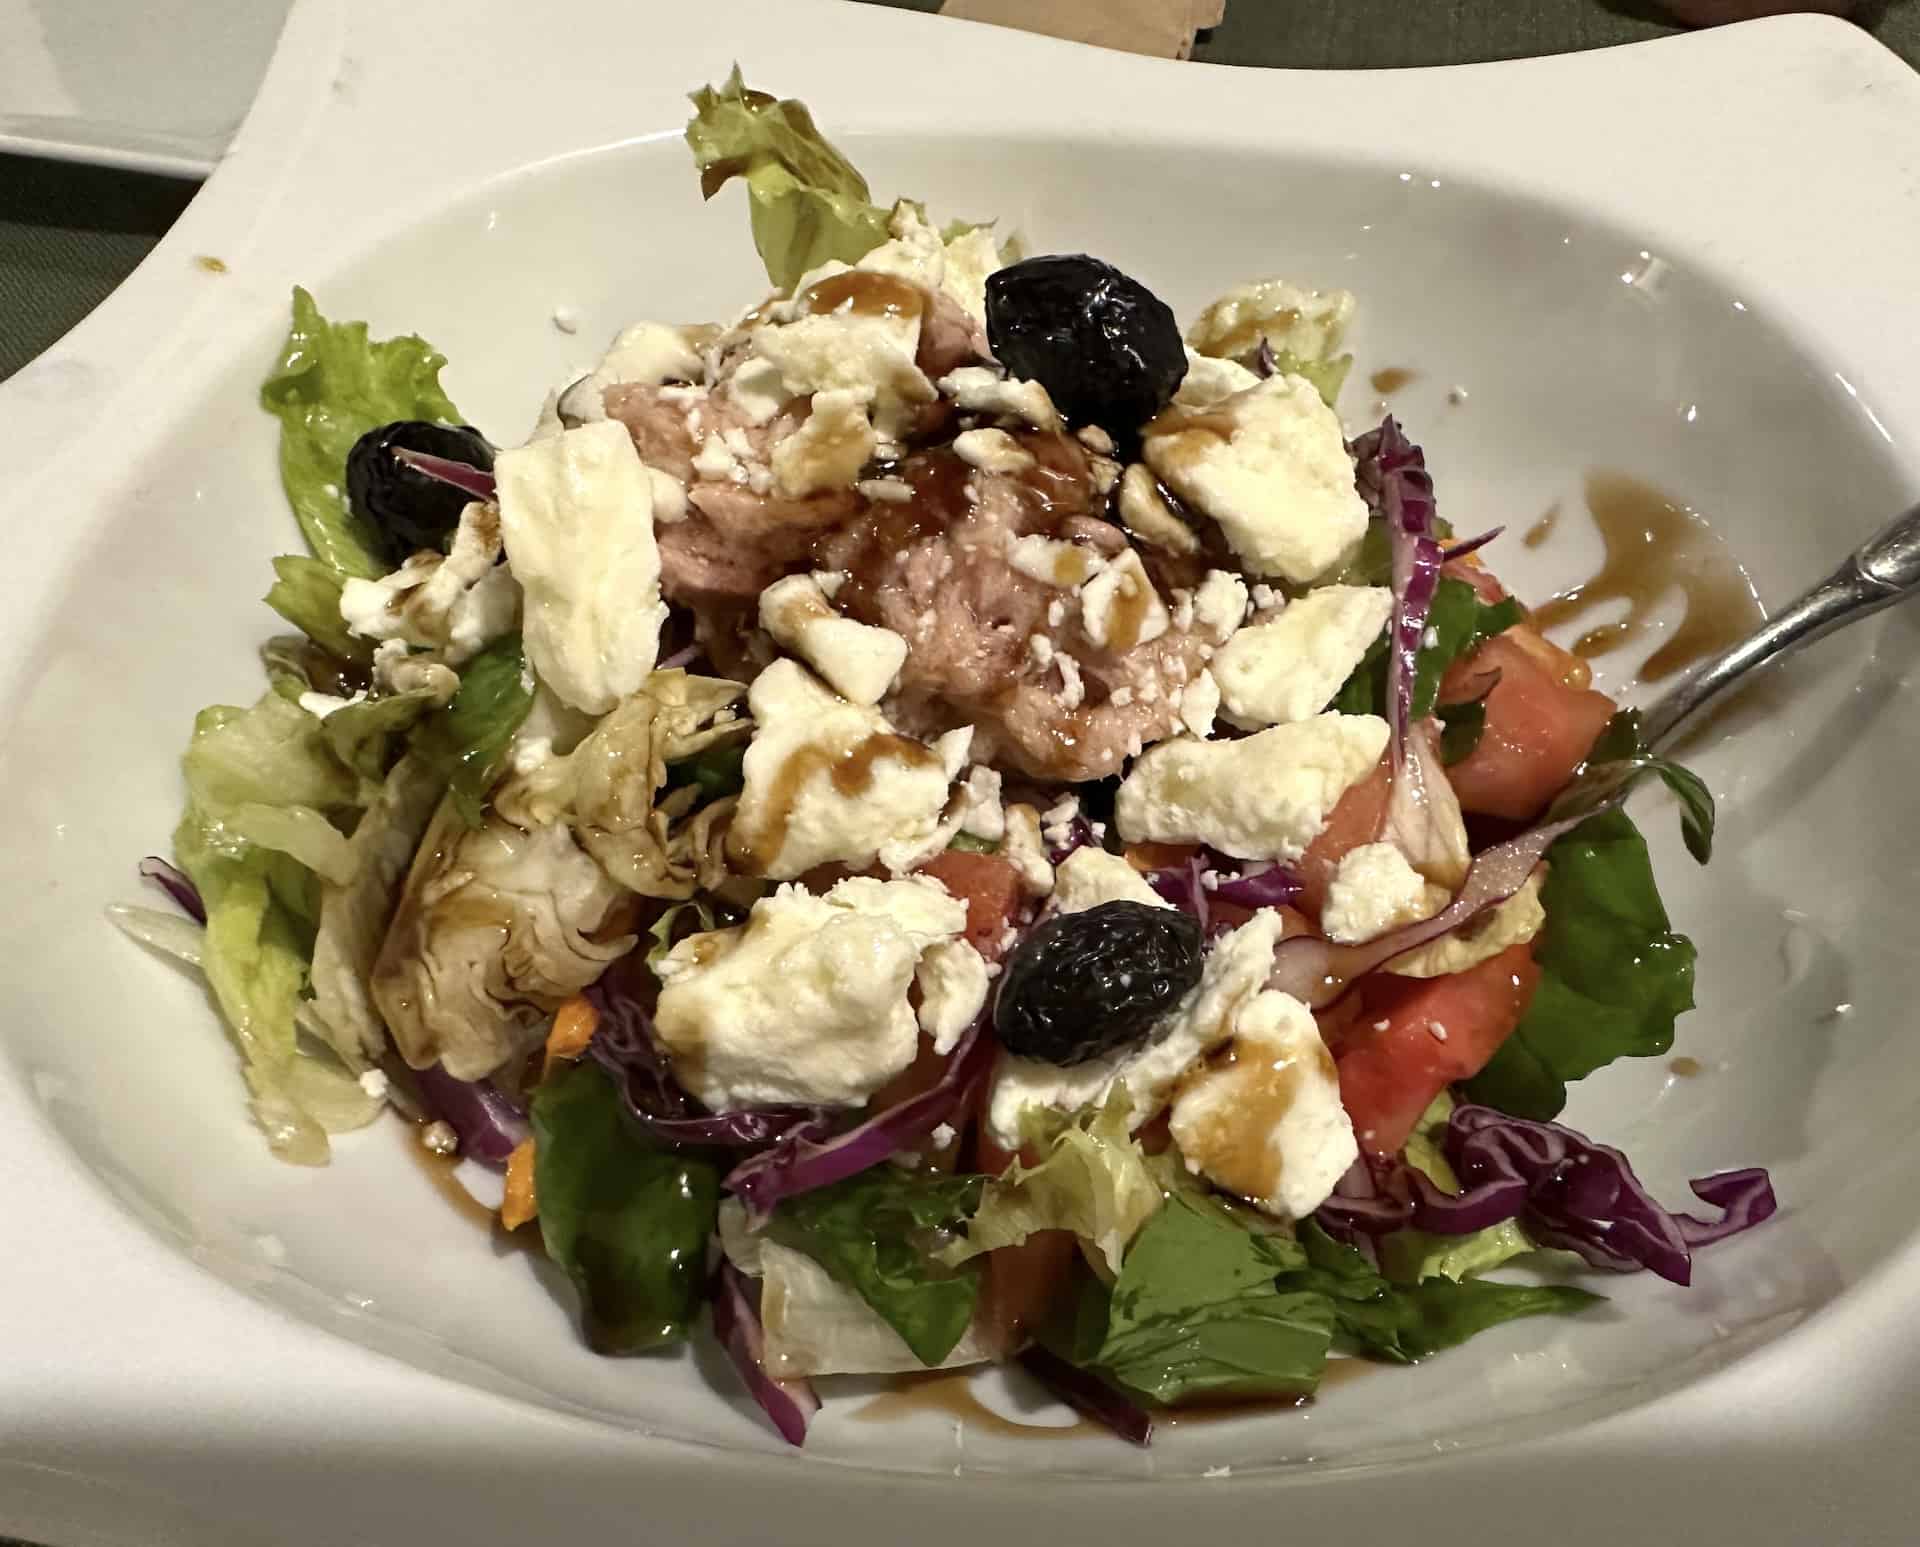 Salad with tuna at Old House Restaurant